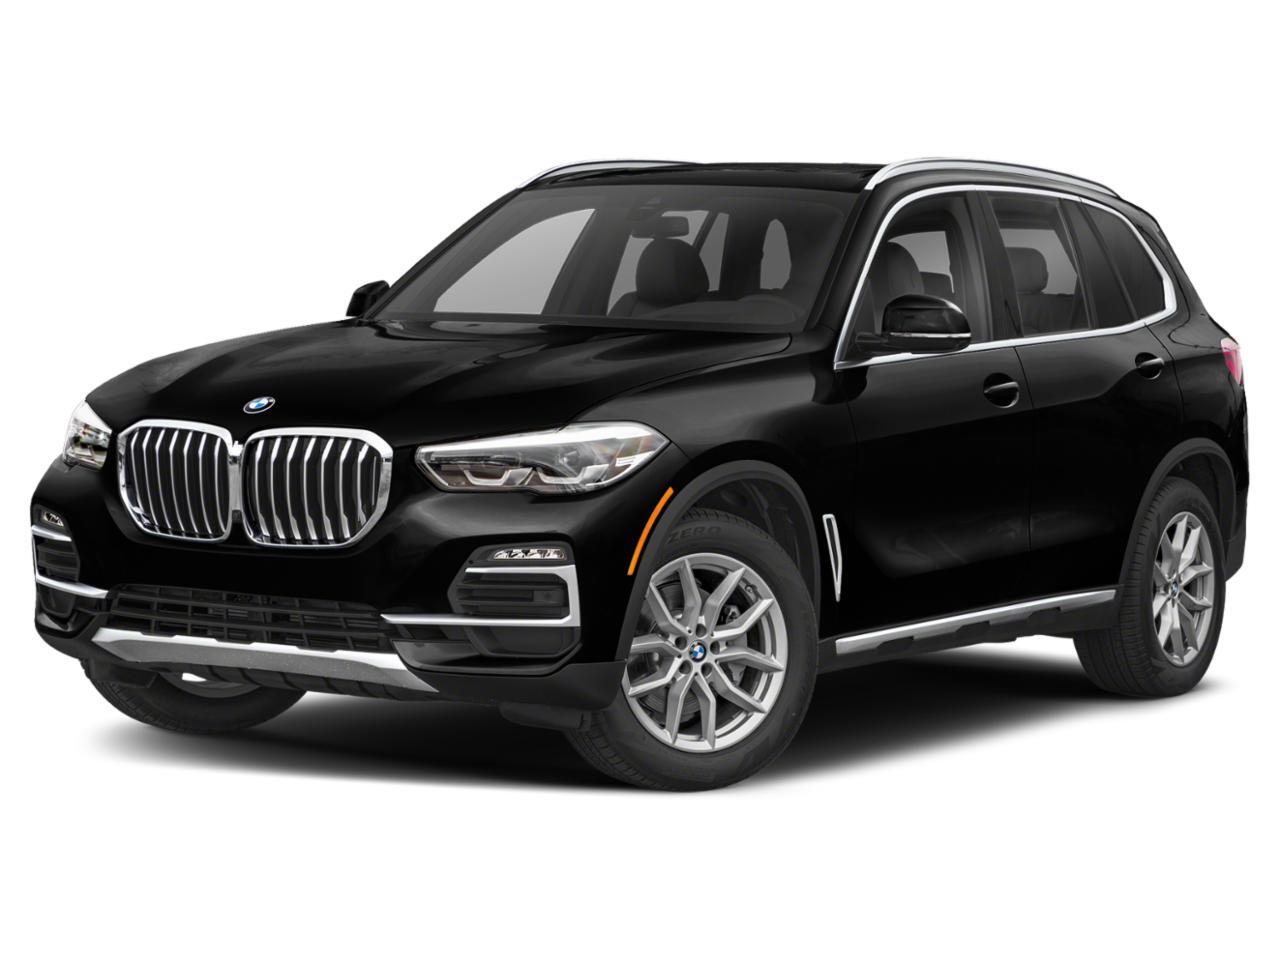 2019 BMW X5 SKY LOUNGE ROOF| HEATED FRONT AND REAR SEATS| M SP